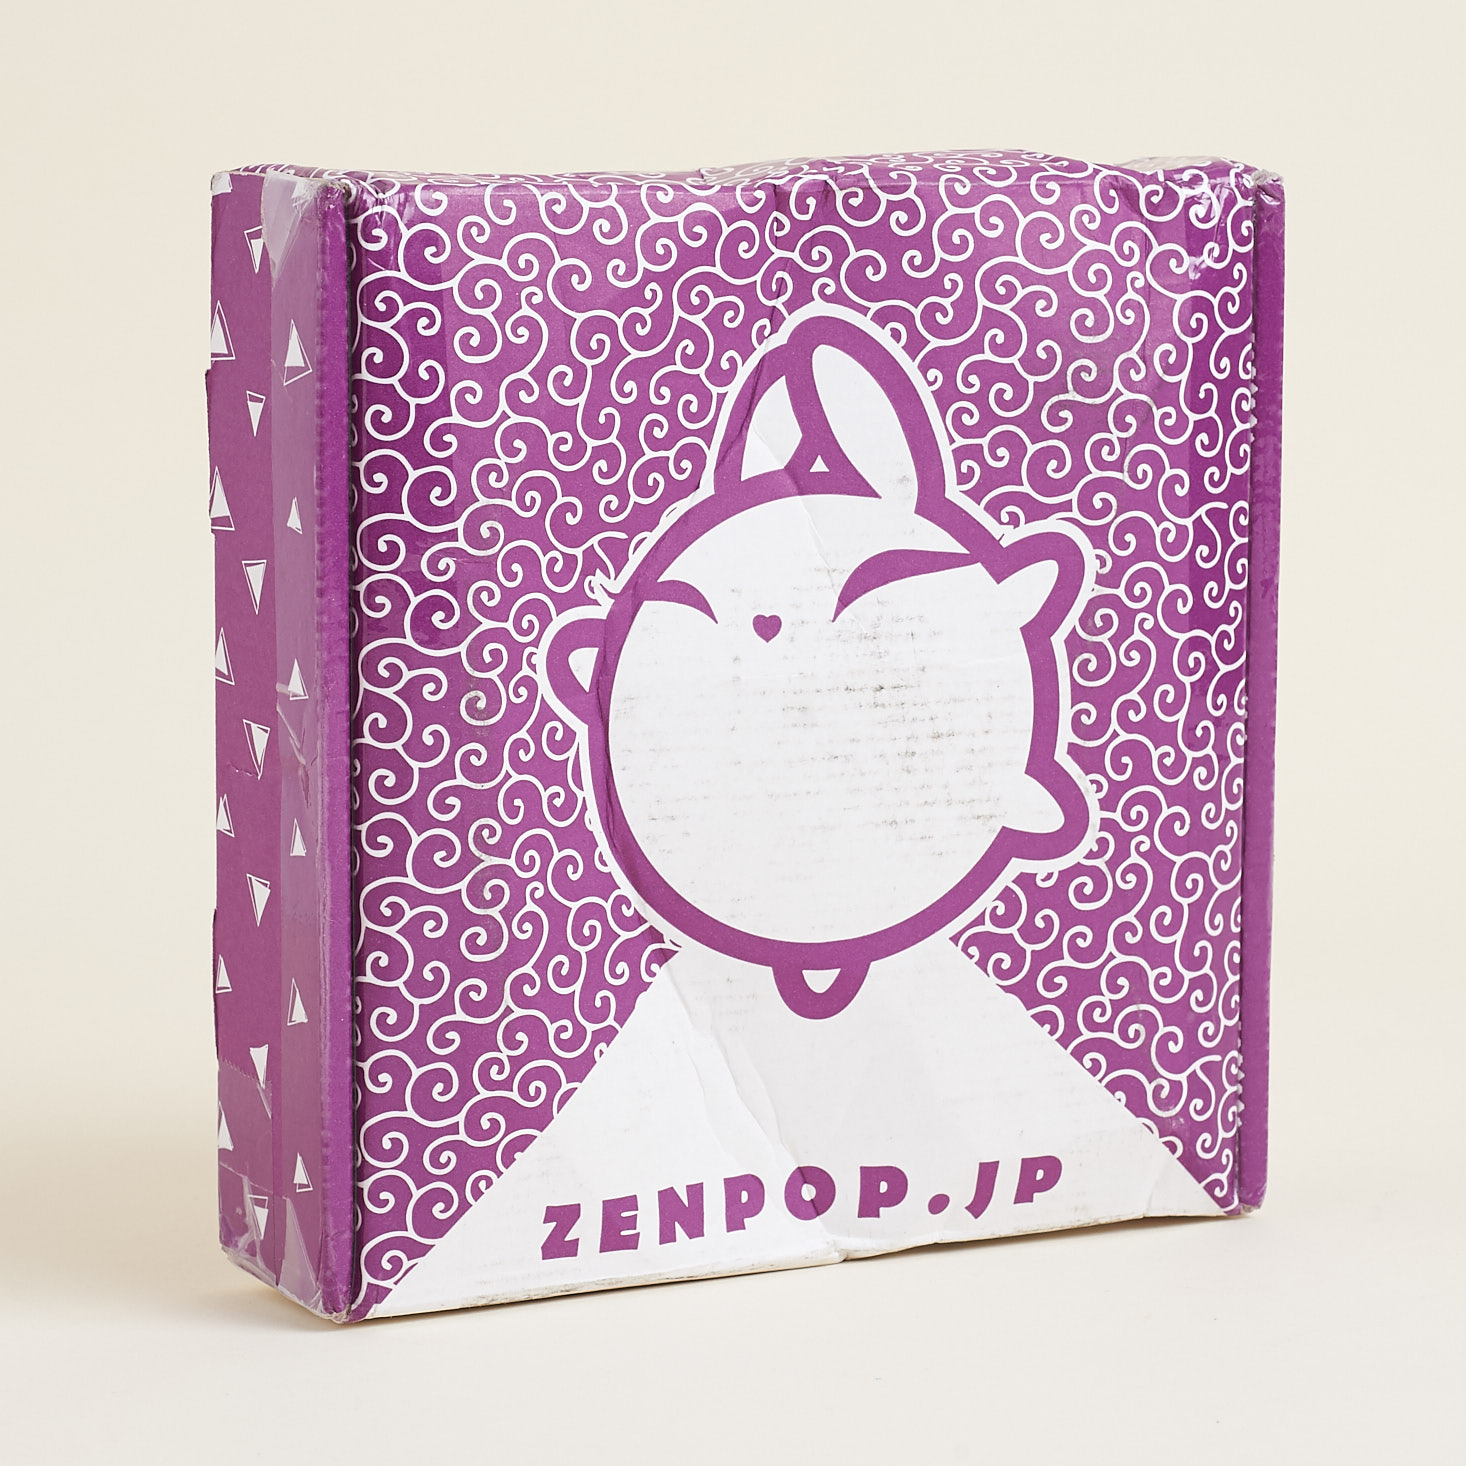 ZenPop Japanese Stationery Pack Review – August 2017